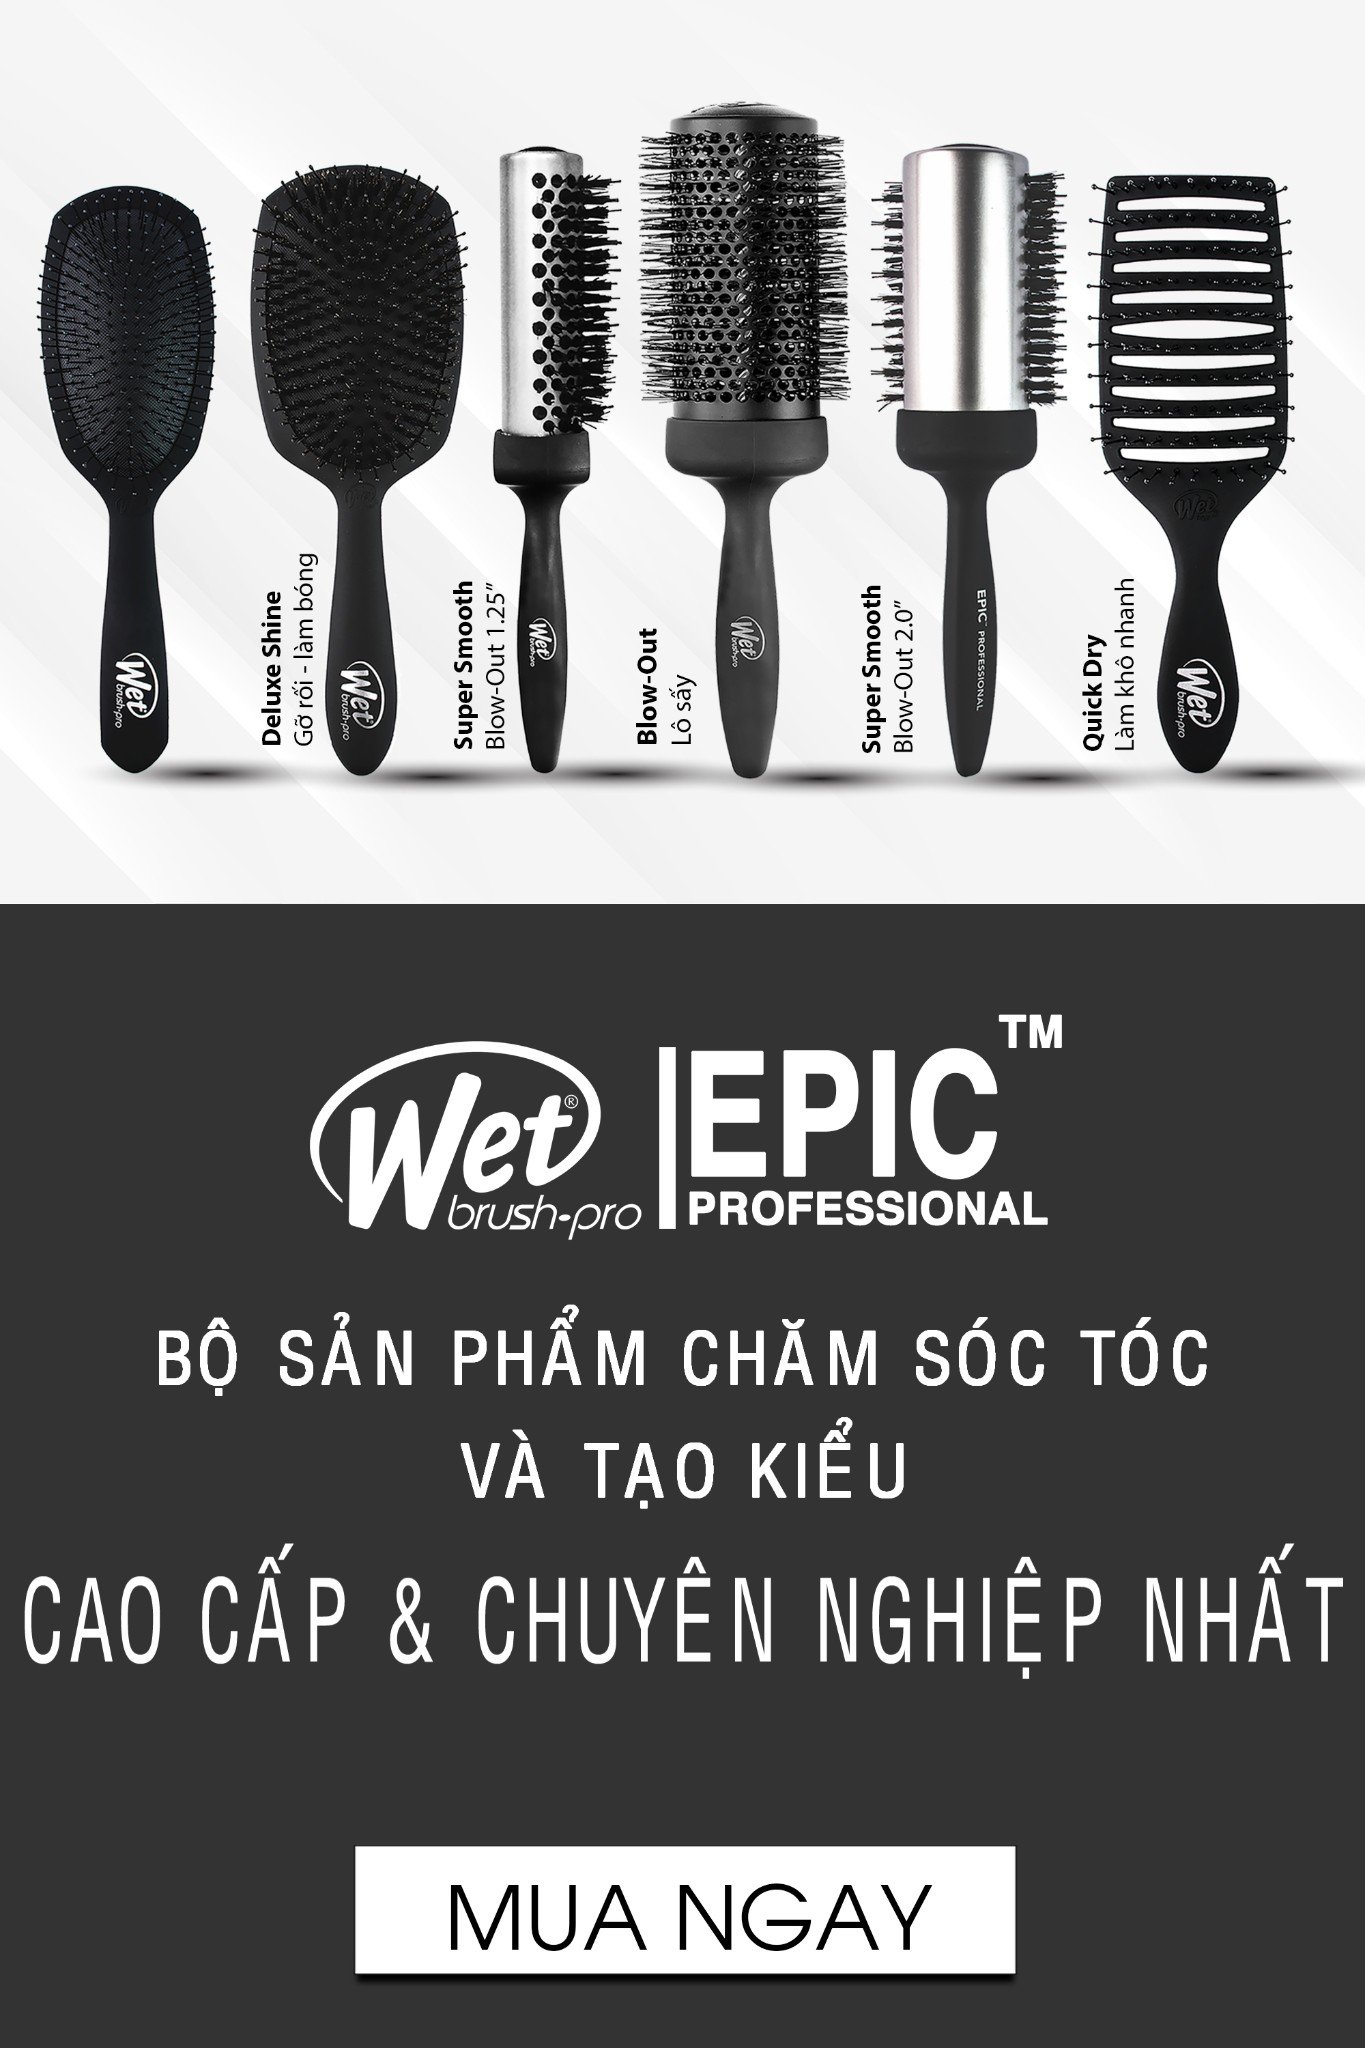 https://wetbrush.vn/collections/dong-chuyen-nghiep-epic-professional